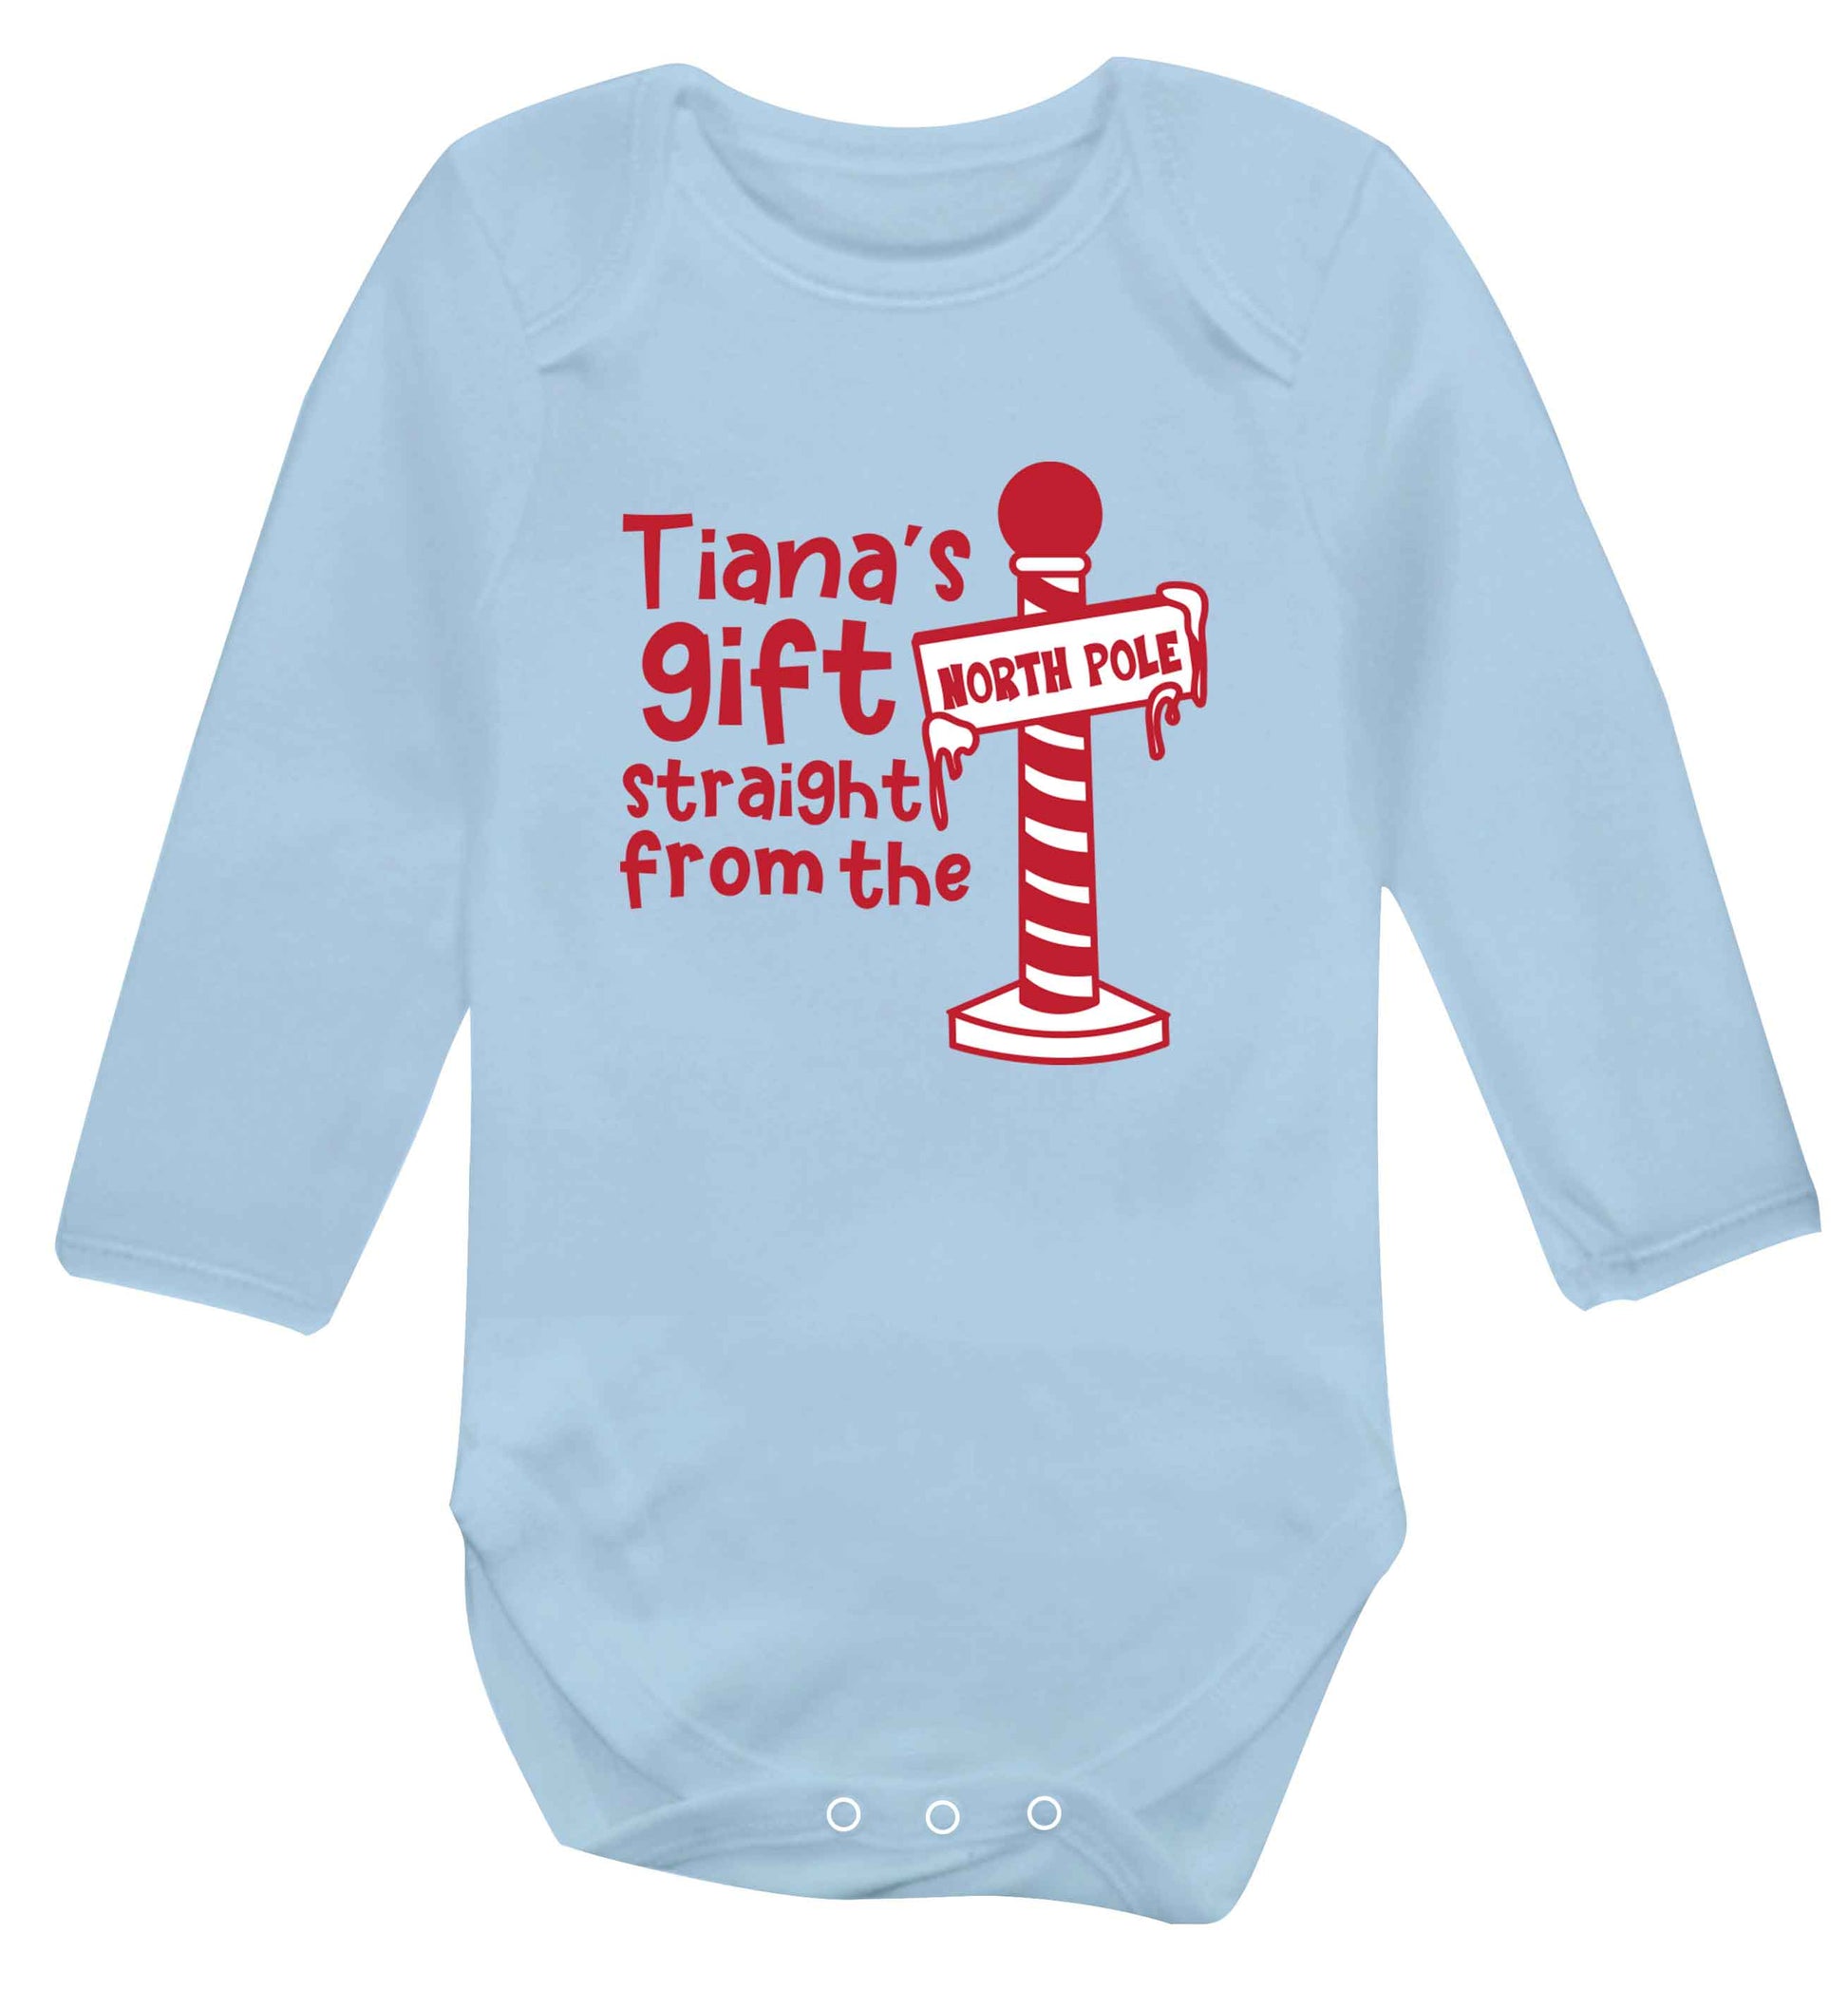 Merry Christmas baby vest long sleeved pale blue 6-12 months